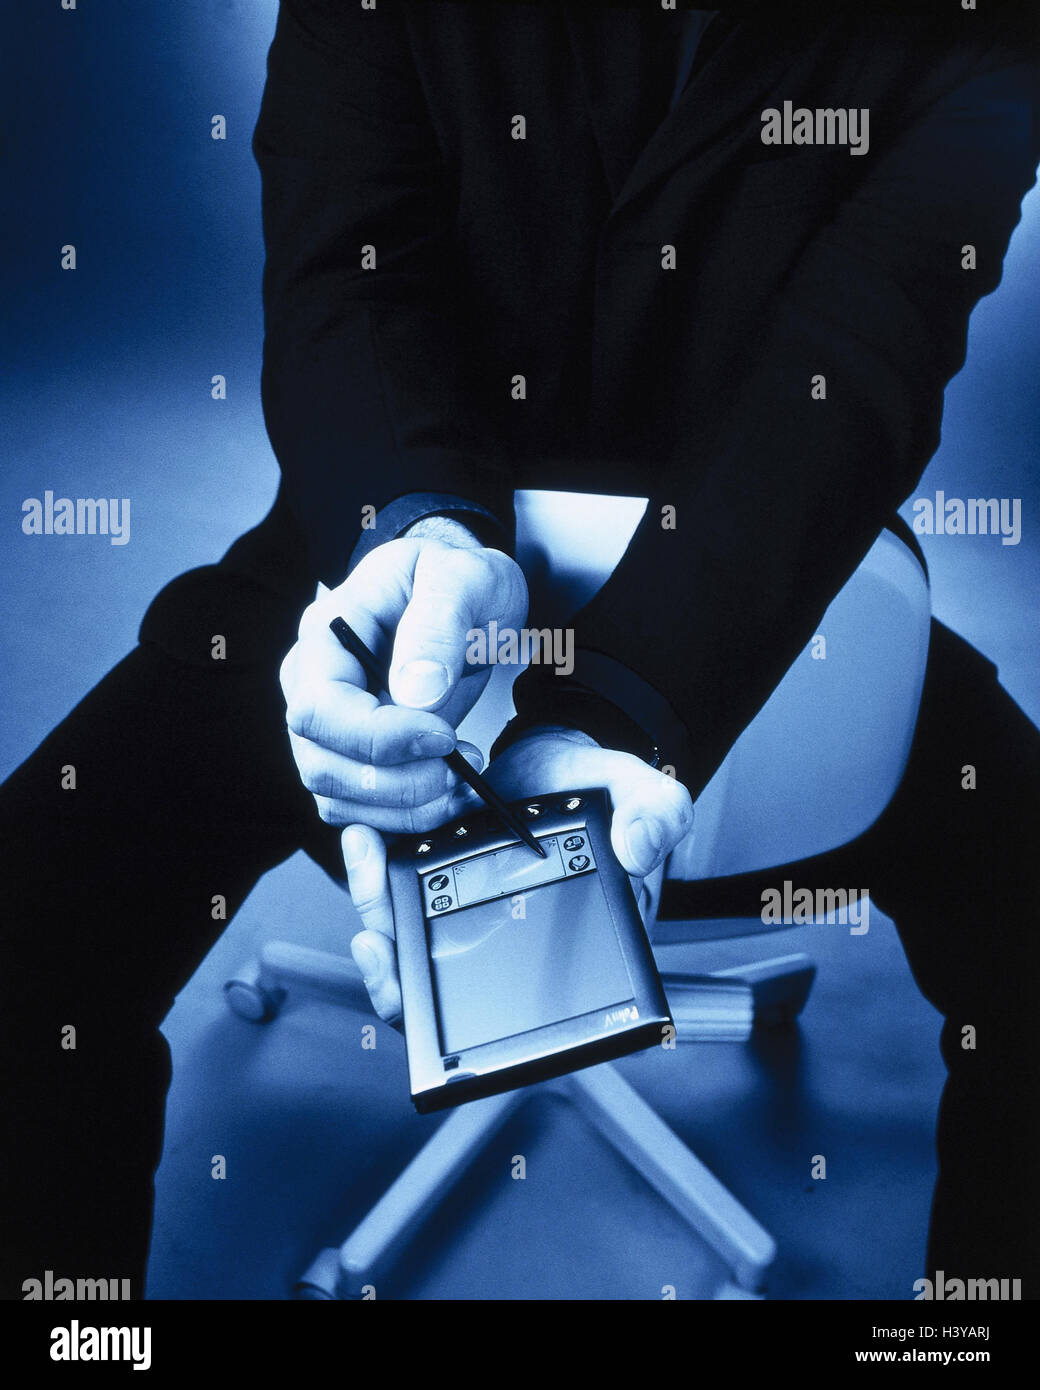 Man, detail, hand hero PC, service, monochrome, businessman, work, computer, pouch format, 'Palm V', Palmsize, Organizer, notepad, production data acquisition, Touchpen, data entry, use, user, user, user, e-business, e-commerce, data processing, pen, spec Stock Photo